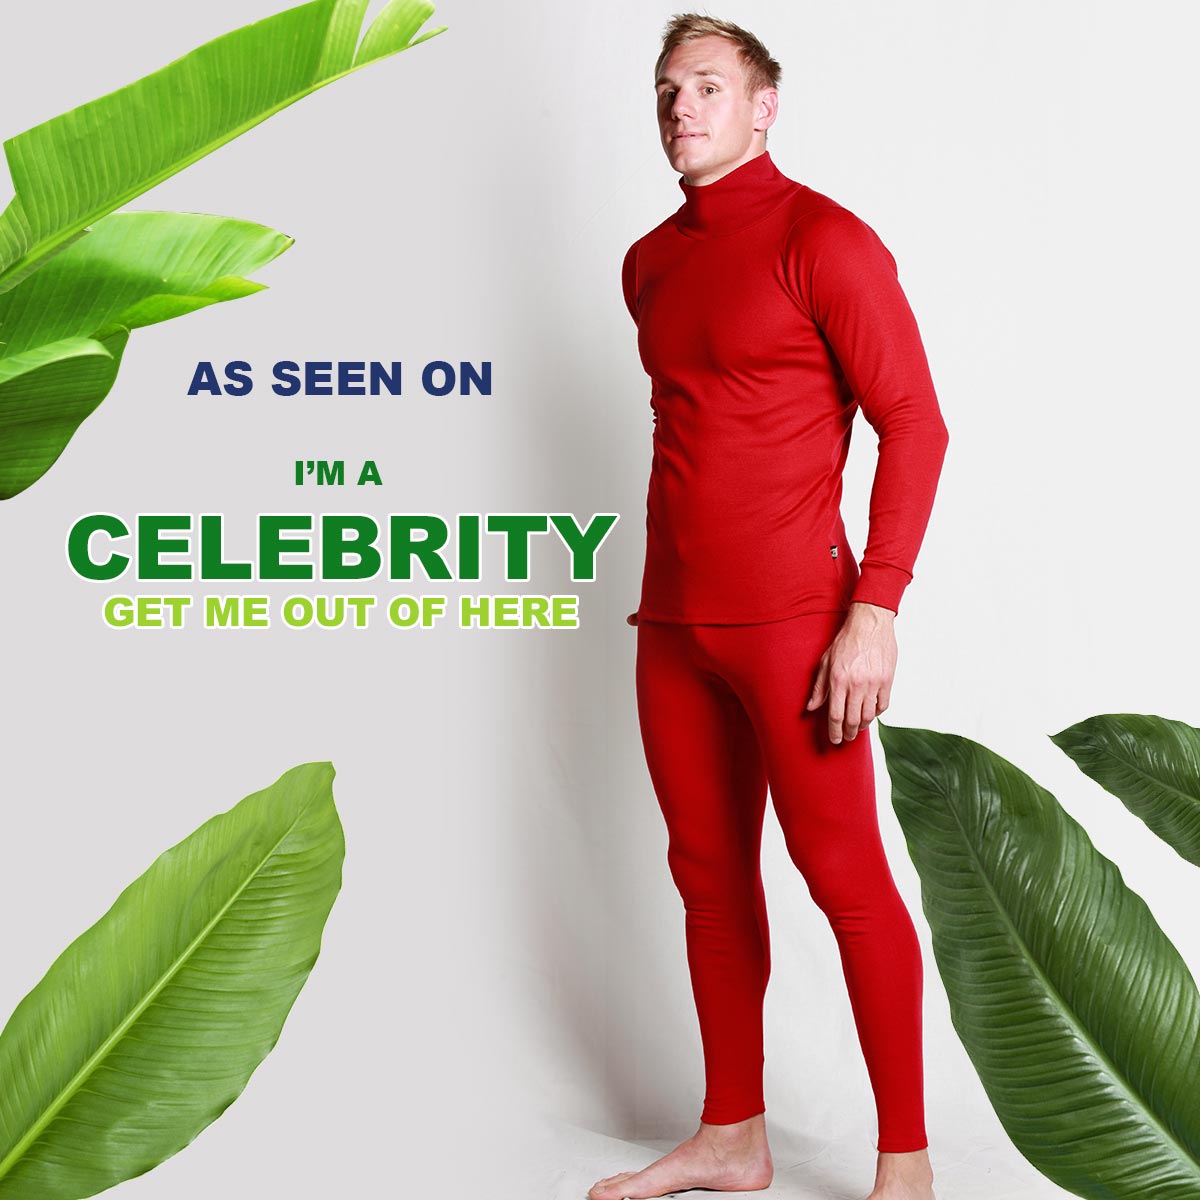 Thermals on I'm a Celebrity Get me out of here